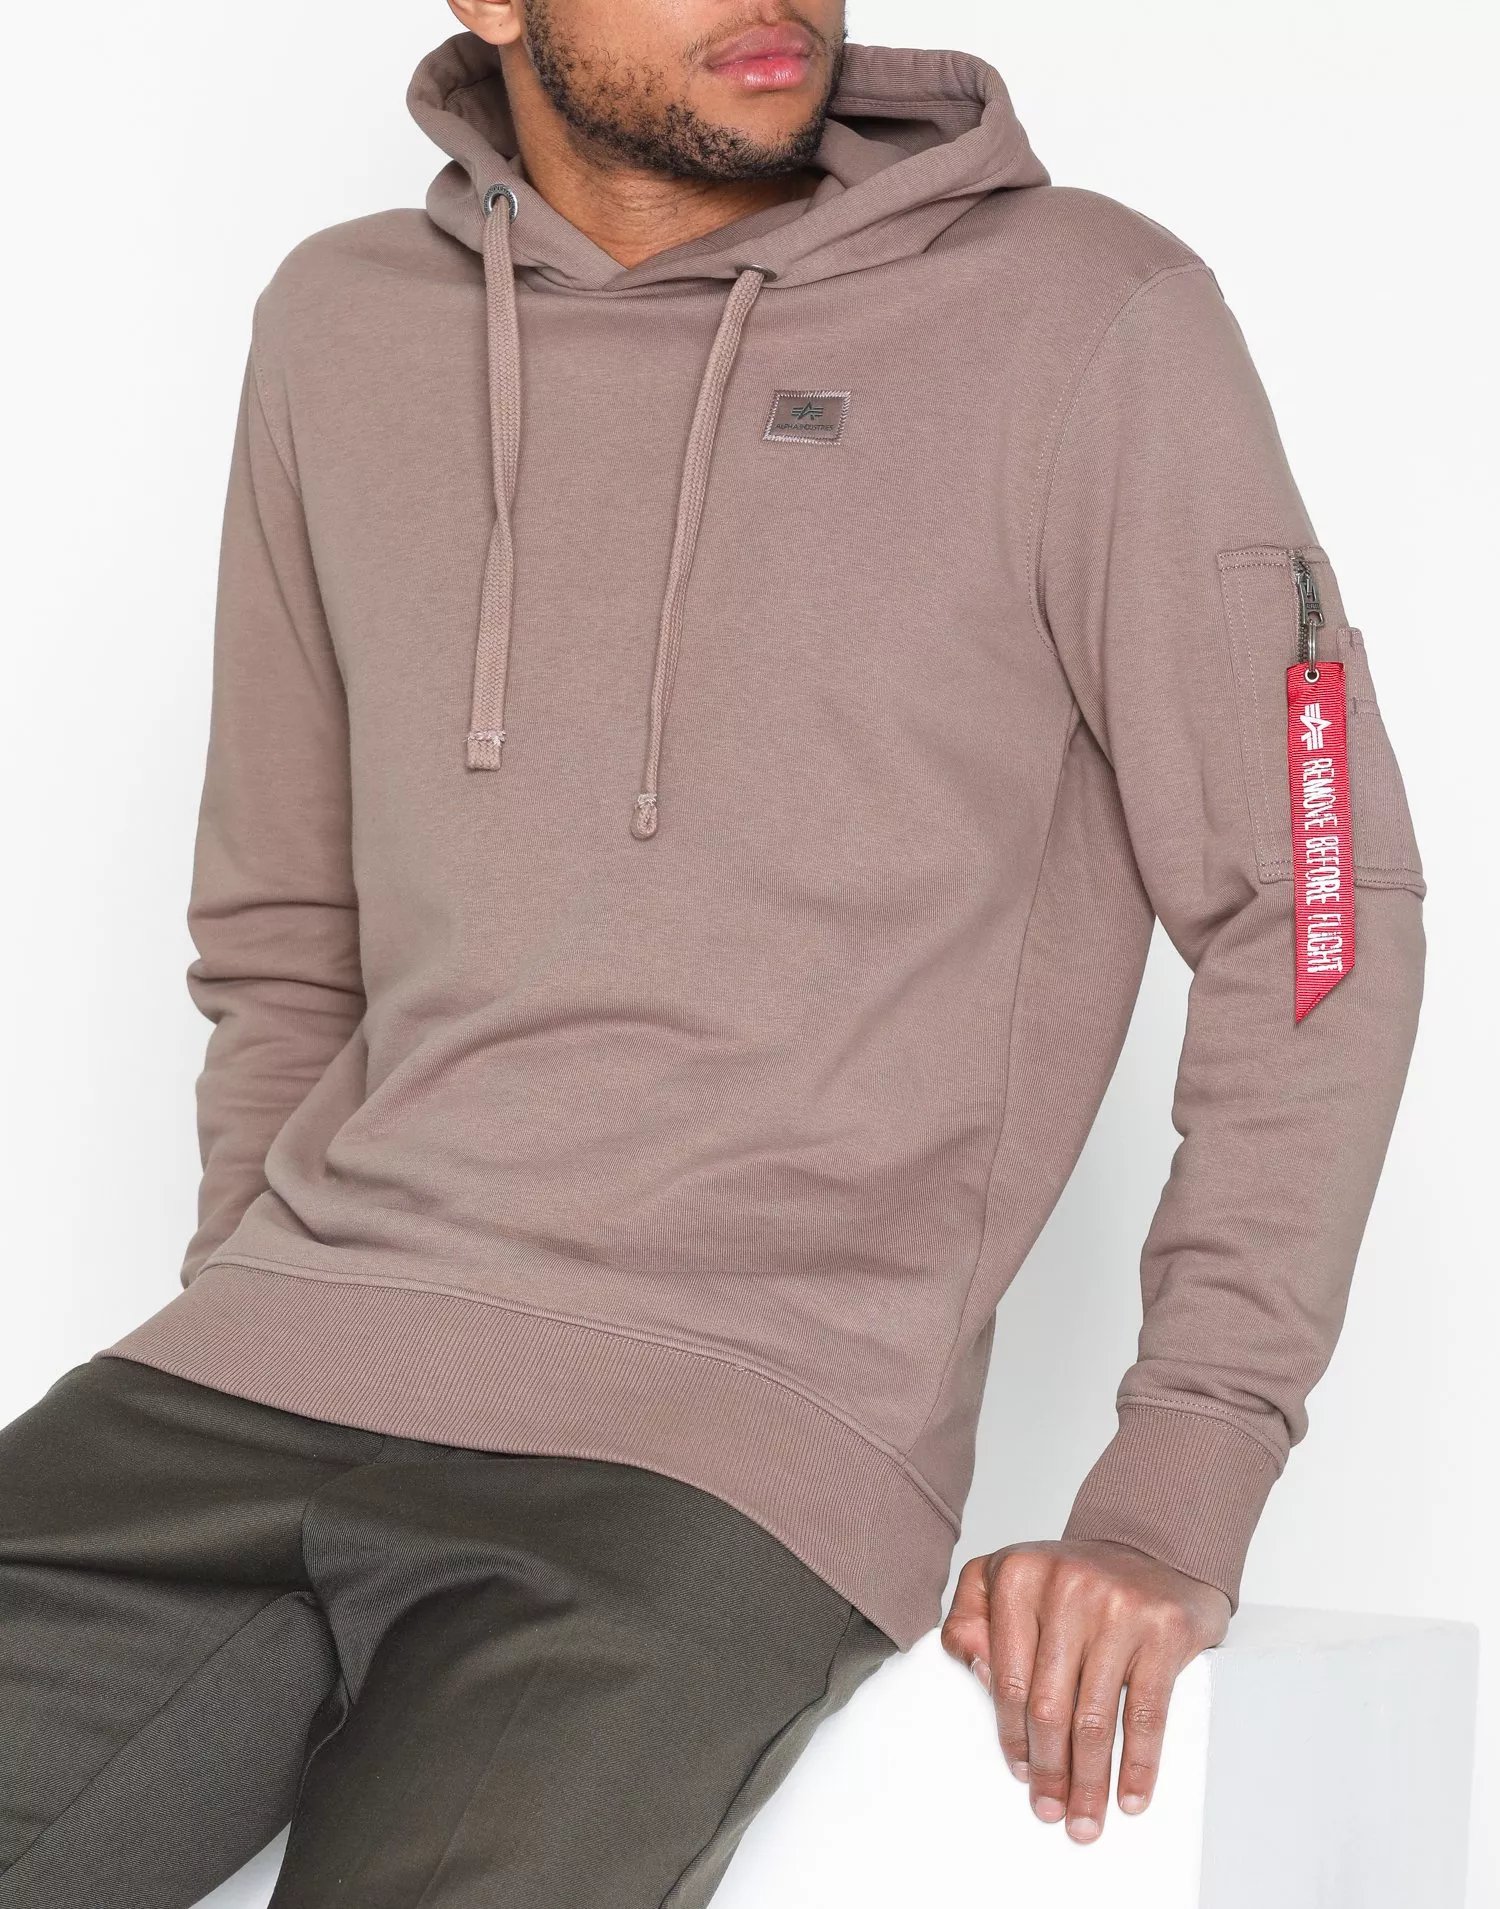 Buy Alpha Industries X-Fit Hoody - Man Mauve NLY 